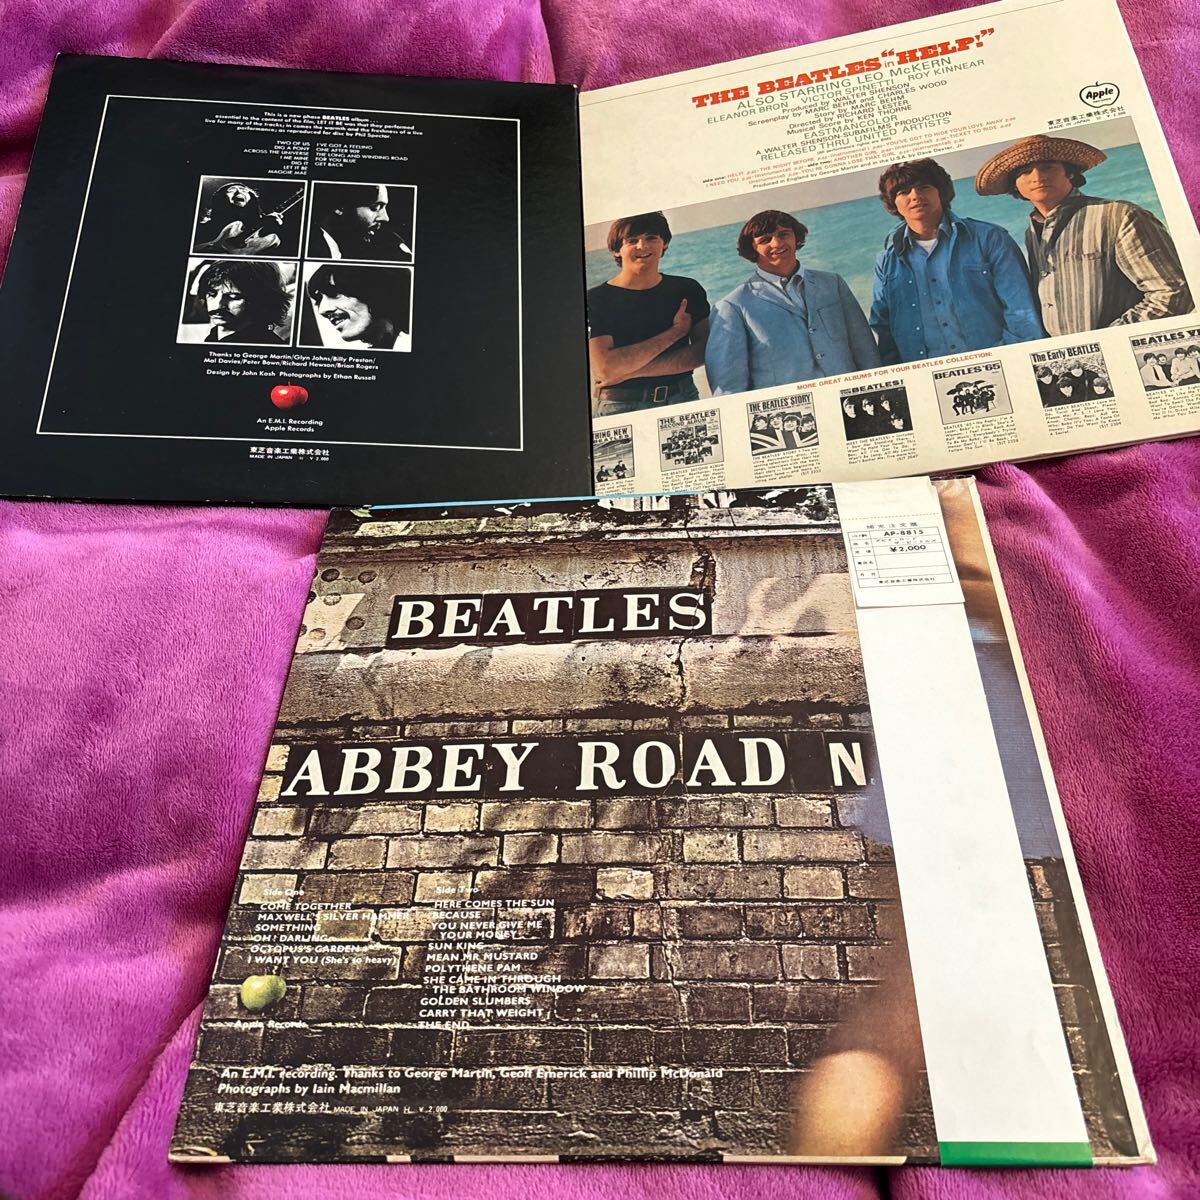  Beatles |LP | maru obi together 3 sheets | let ito Be red record | abbey road red record | help black record | all bending complete audition settled | sound stone chip none | lyric card attaching 